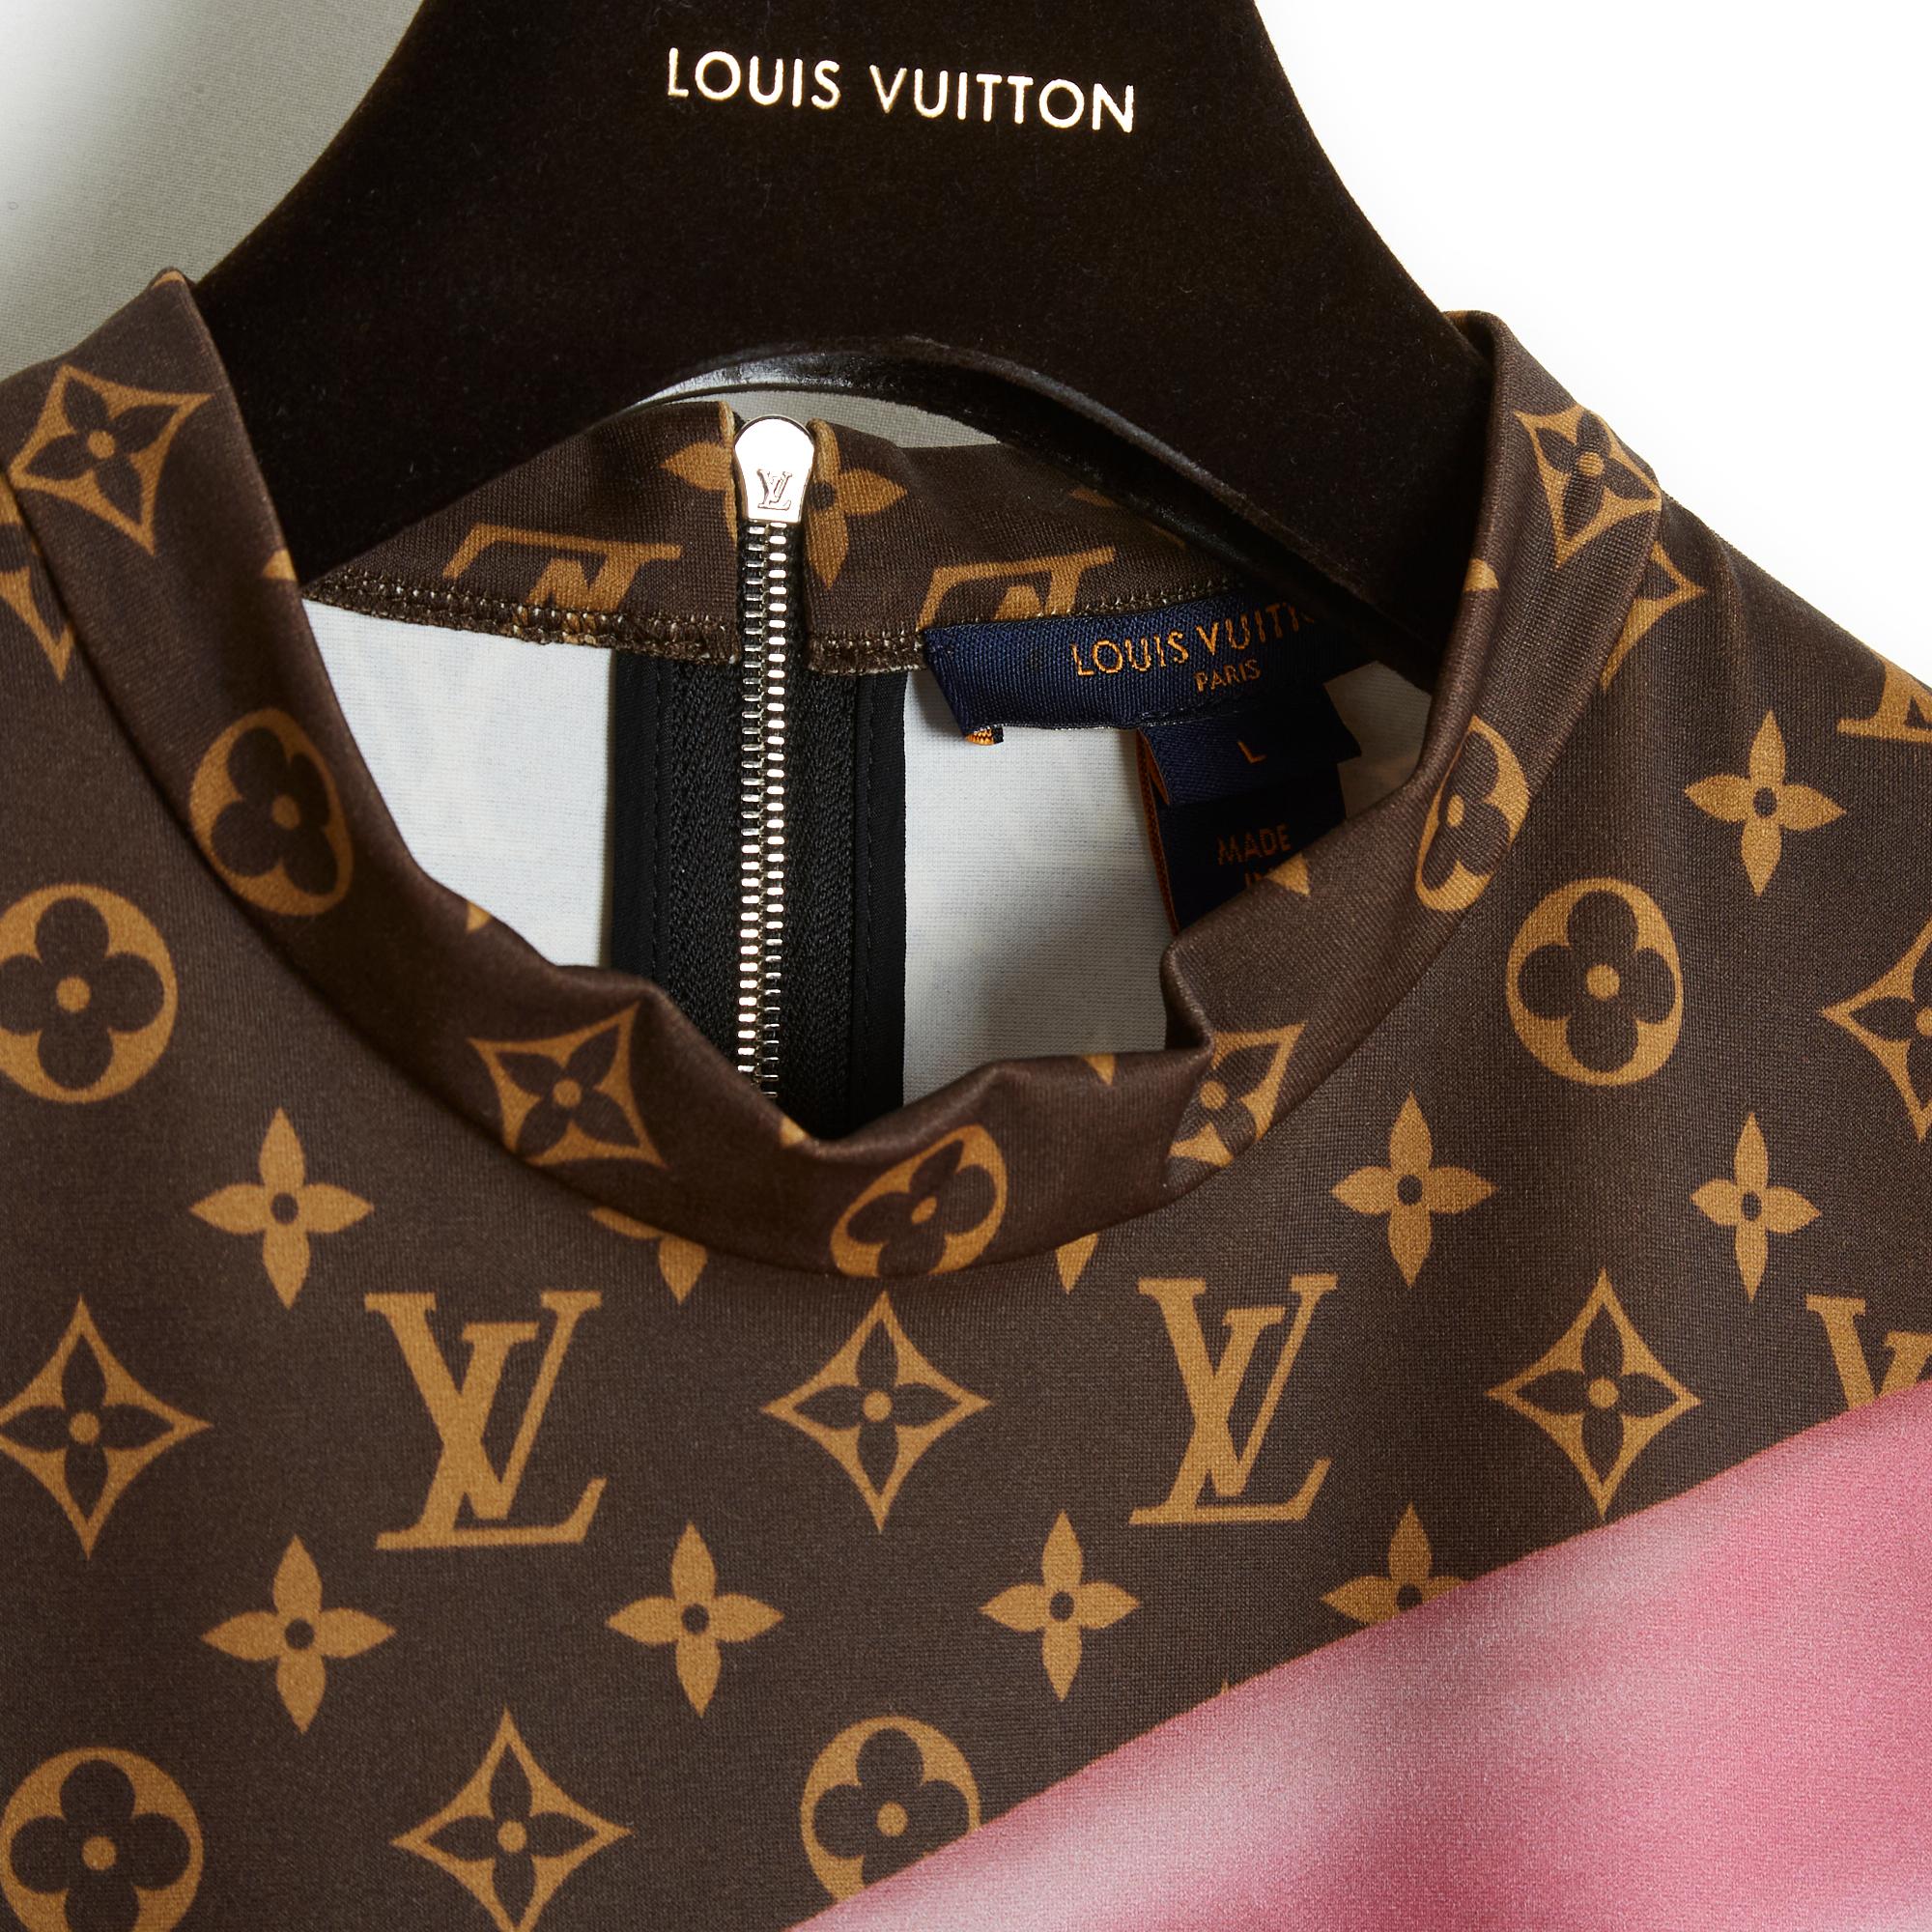 Black 2021 Louis Vuitton Top t shirt Monogram L New with tags 